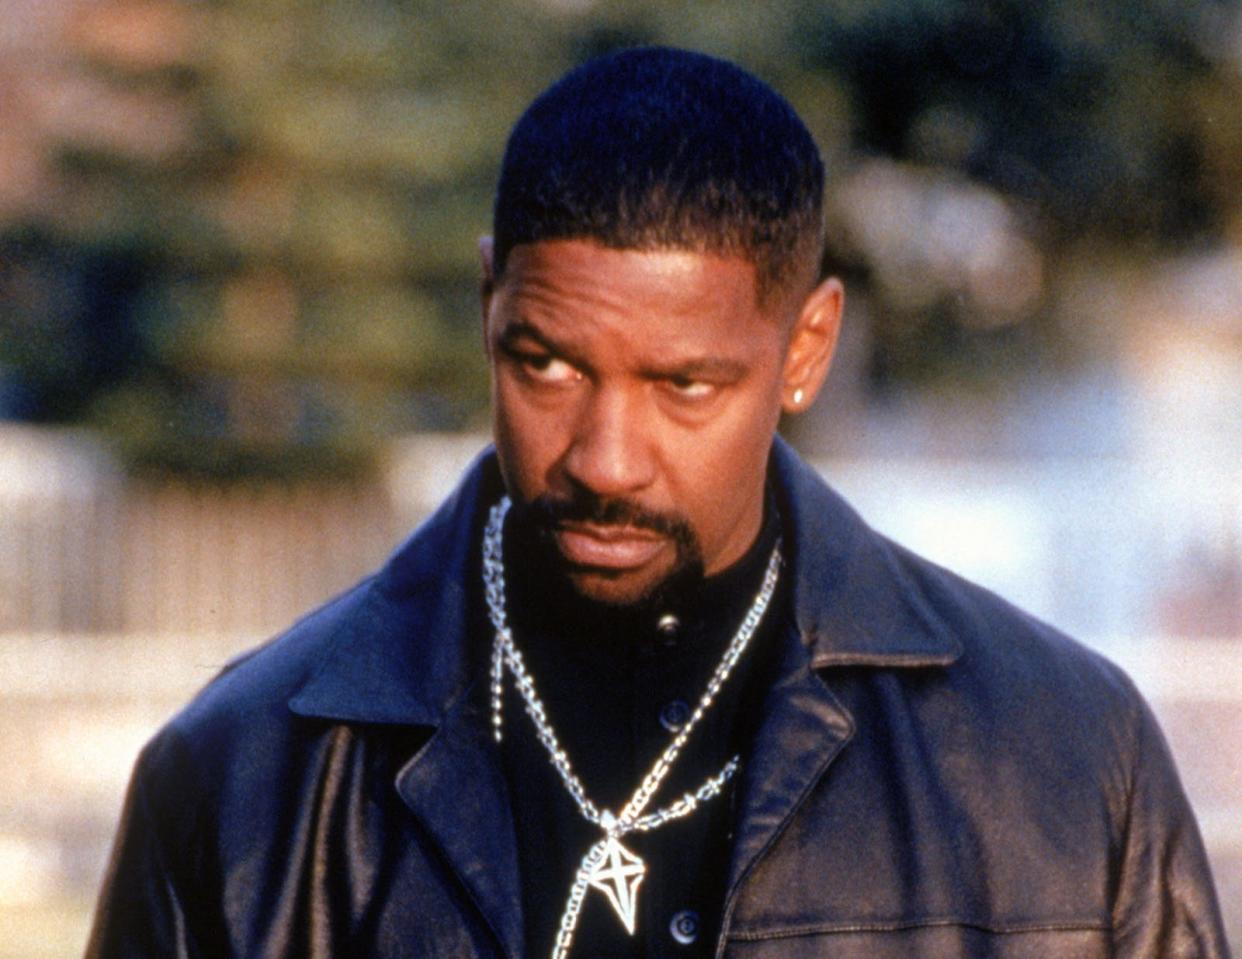 Denzel Washington stars as a corrupt and volatile LA cop taking a young officer under his wing in "Training Day."